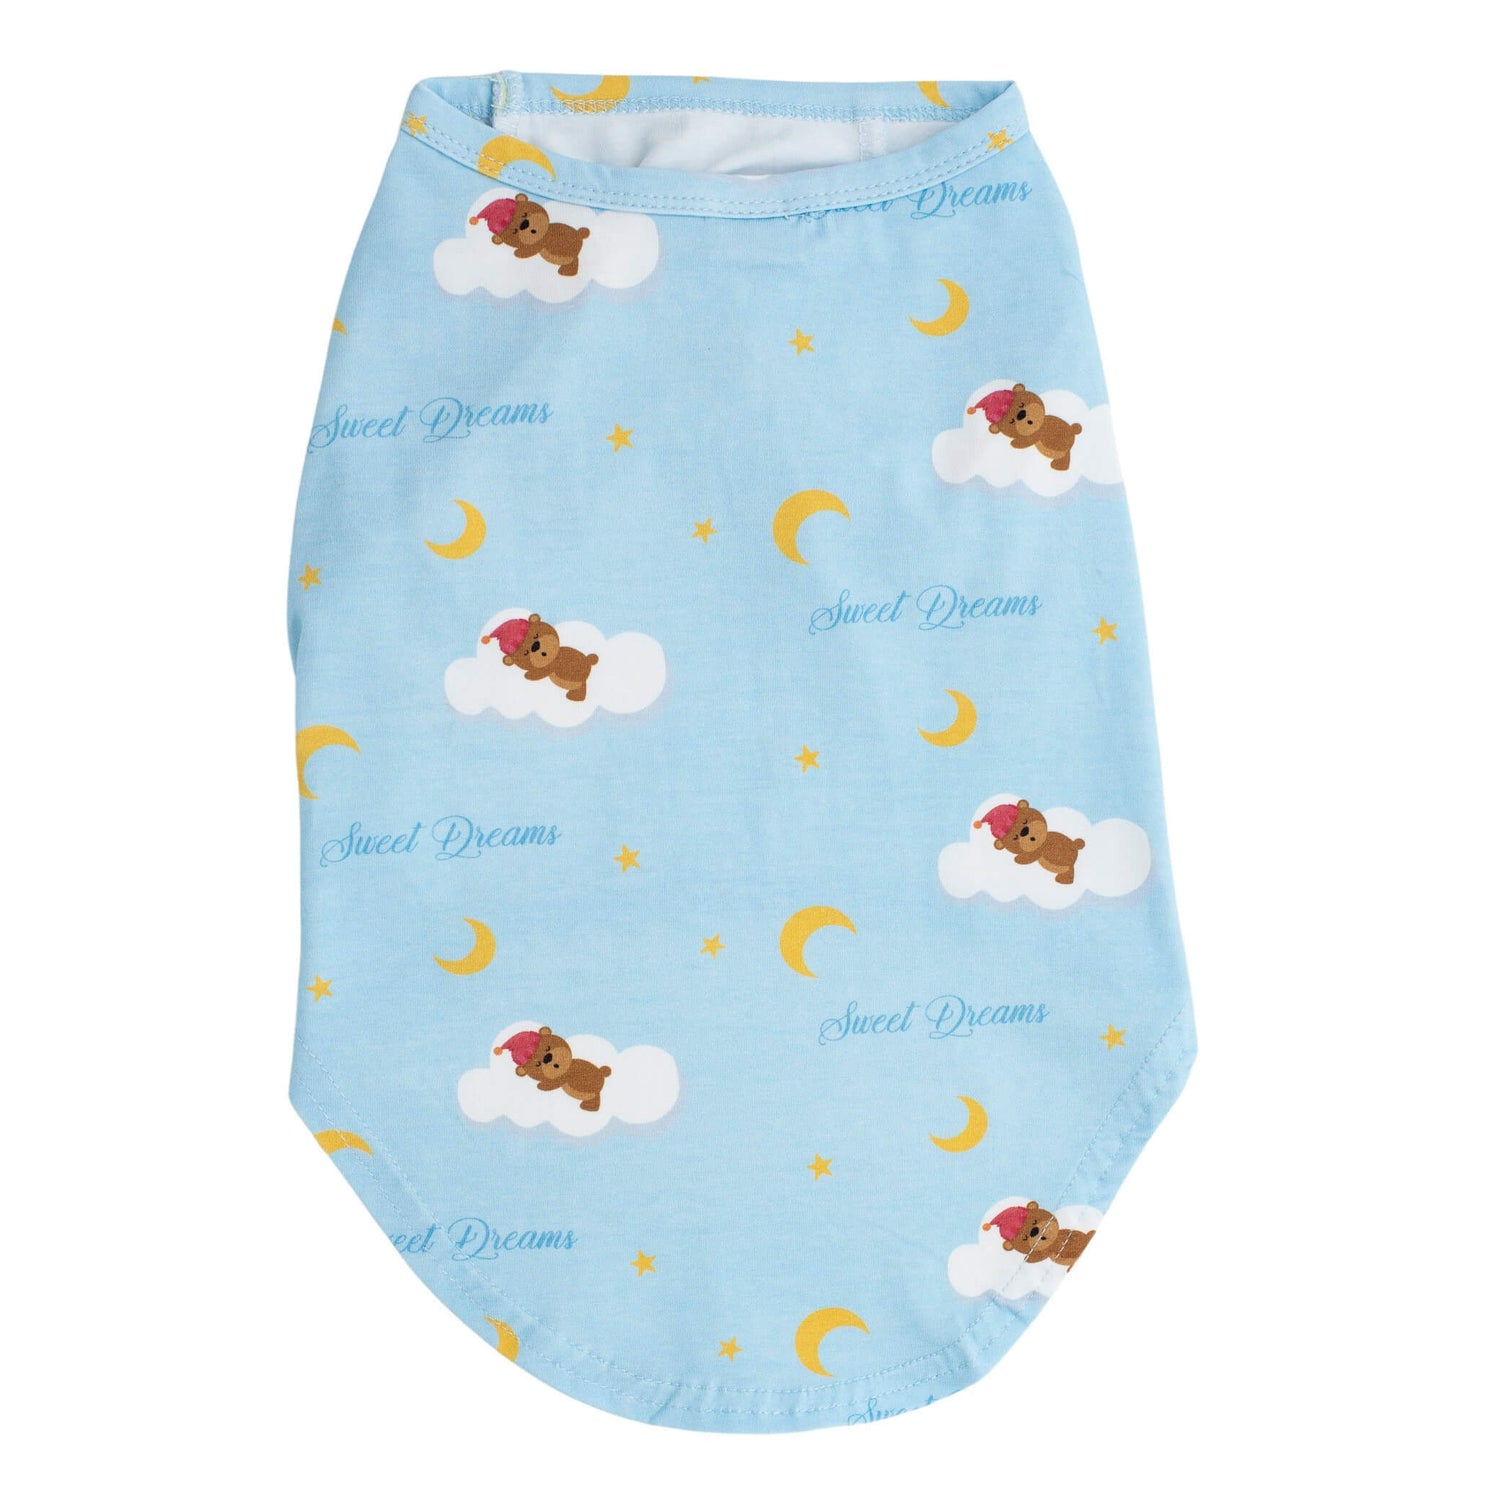 Lil Dreamers dog pyjamas flat lay of the back of the PJS. The shirt is light blue with teddy bears floating on clouds.